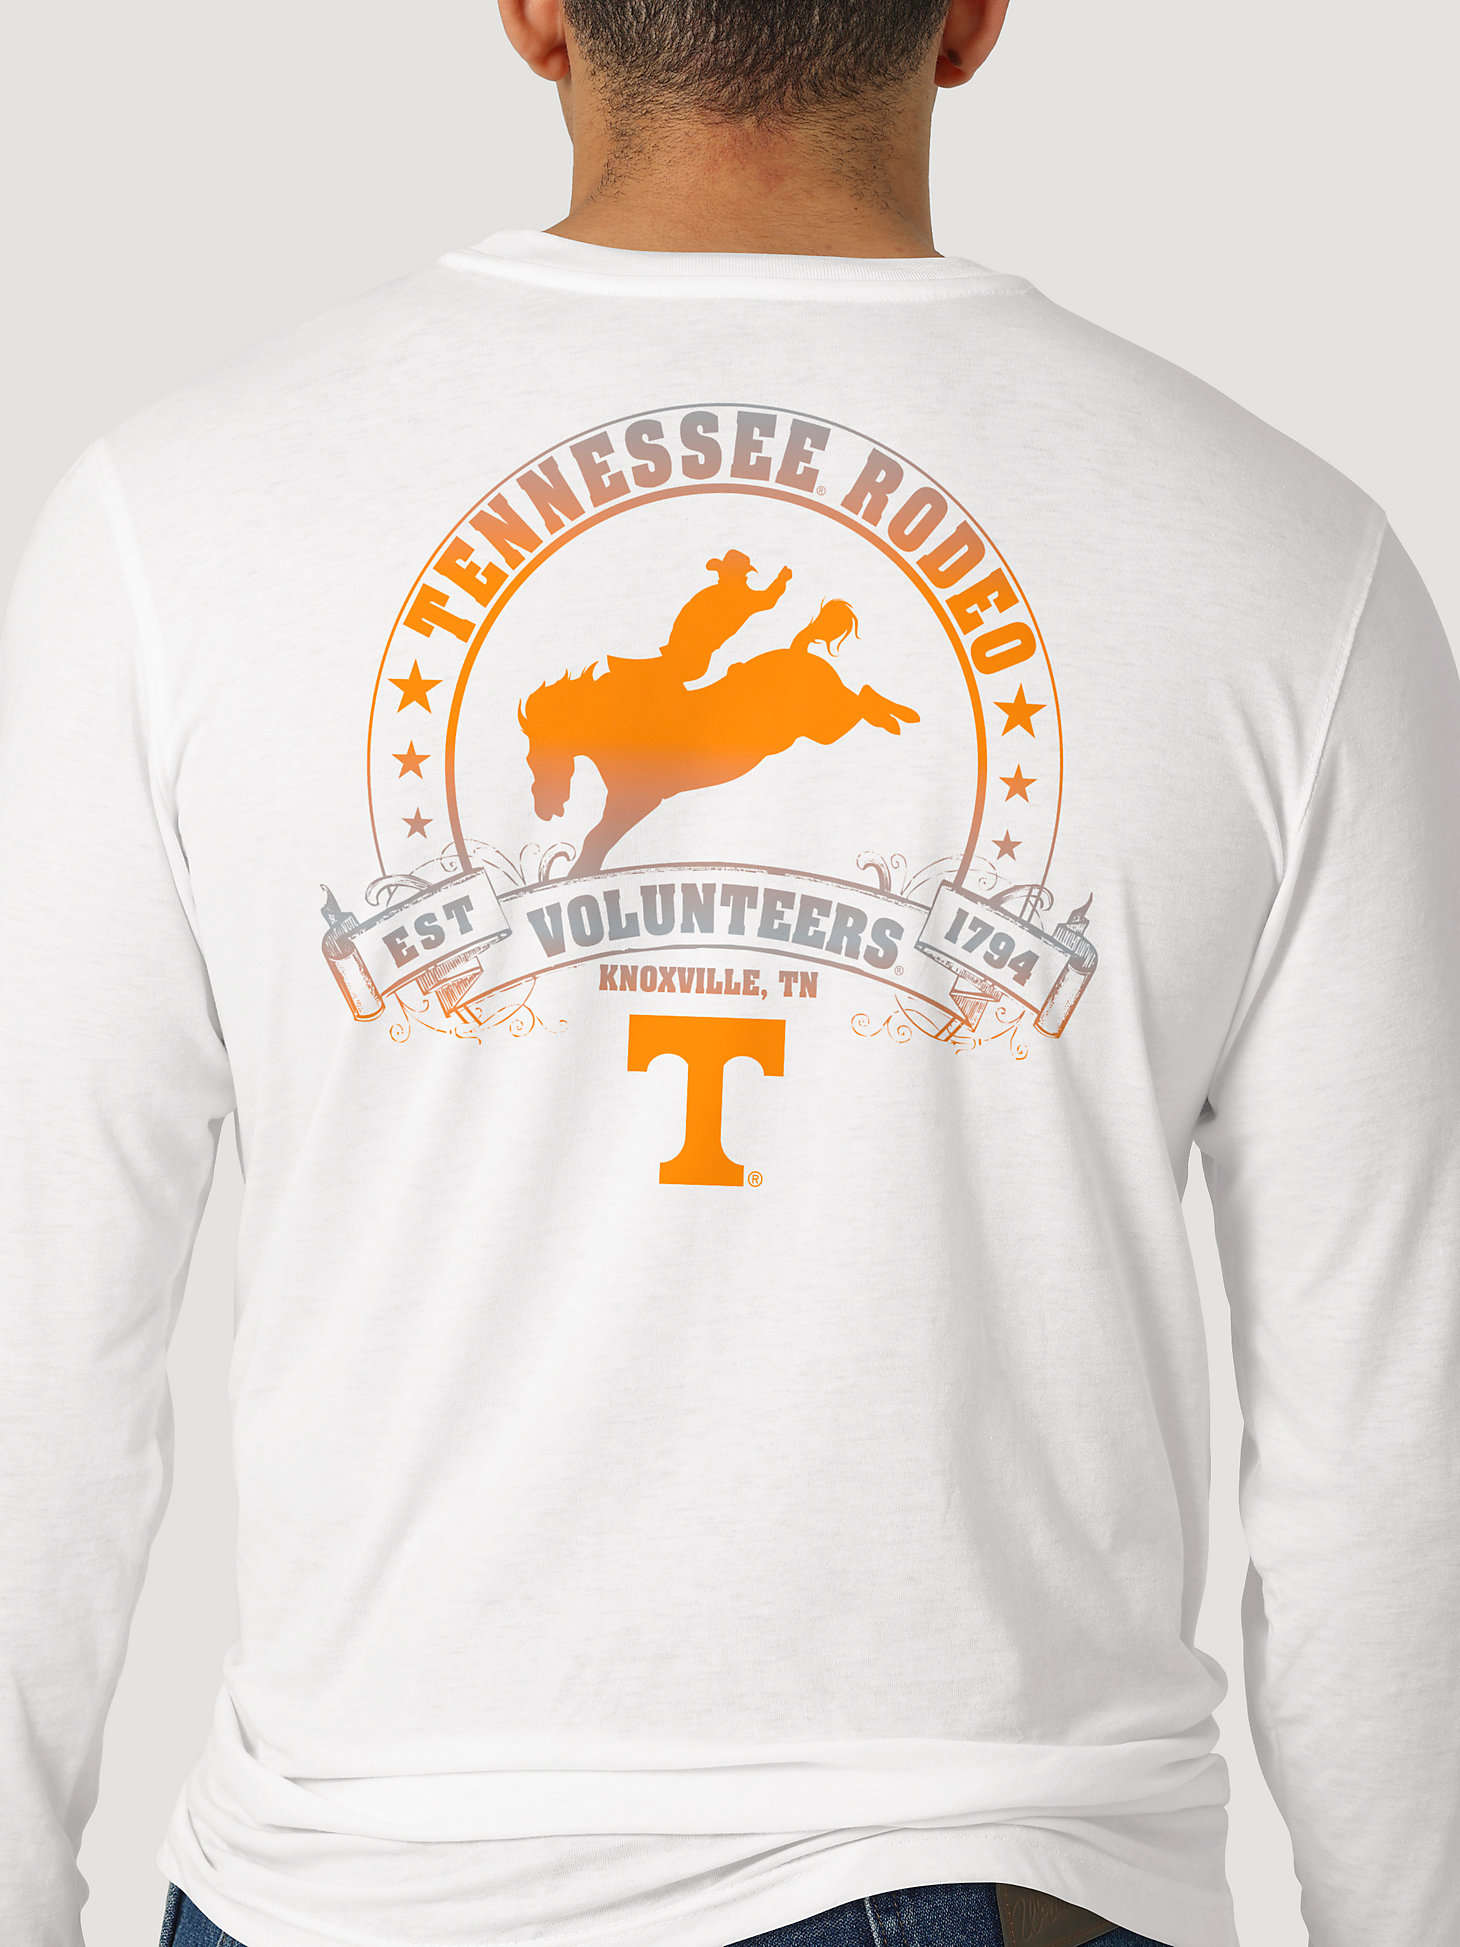 Wrangler Collegiate Rodeo Long Sleeve T-Shirt in University of Tennessee alternative view 4